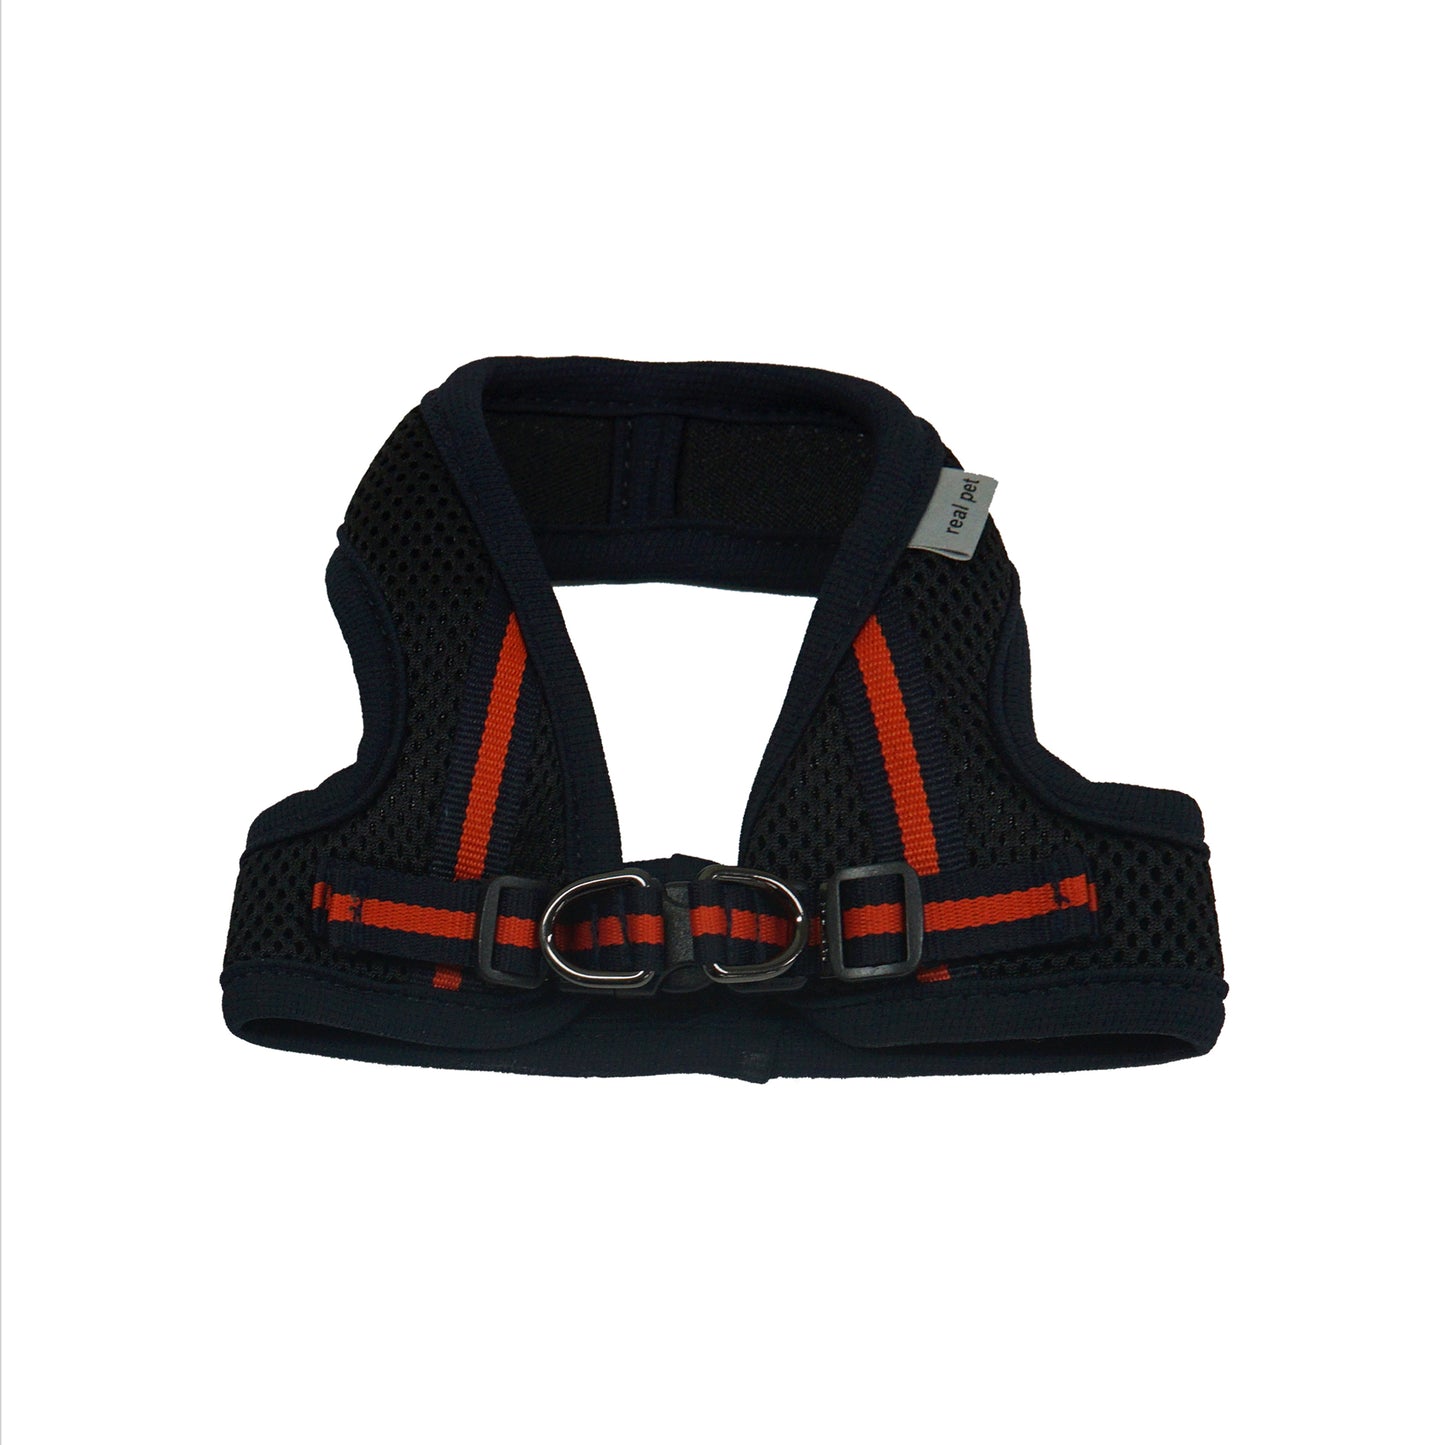 SIMPLY CONTROL HARNESS